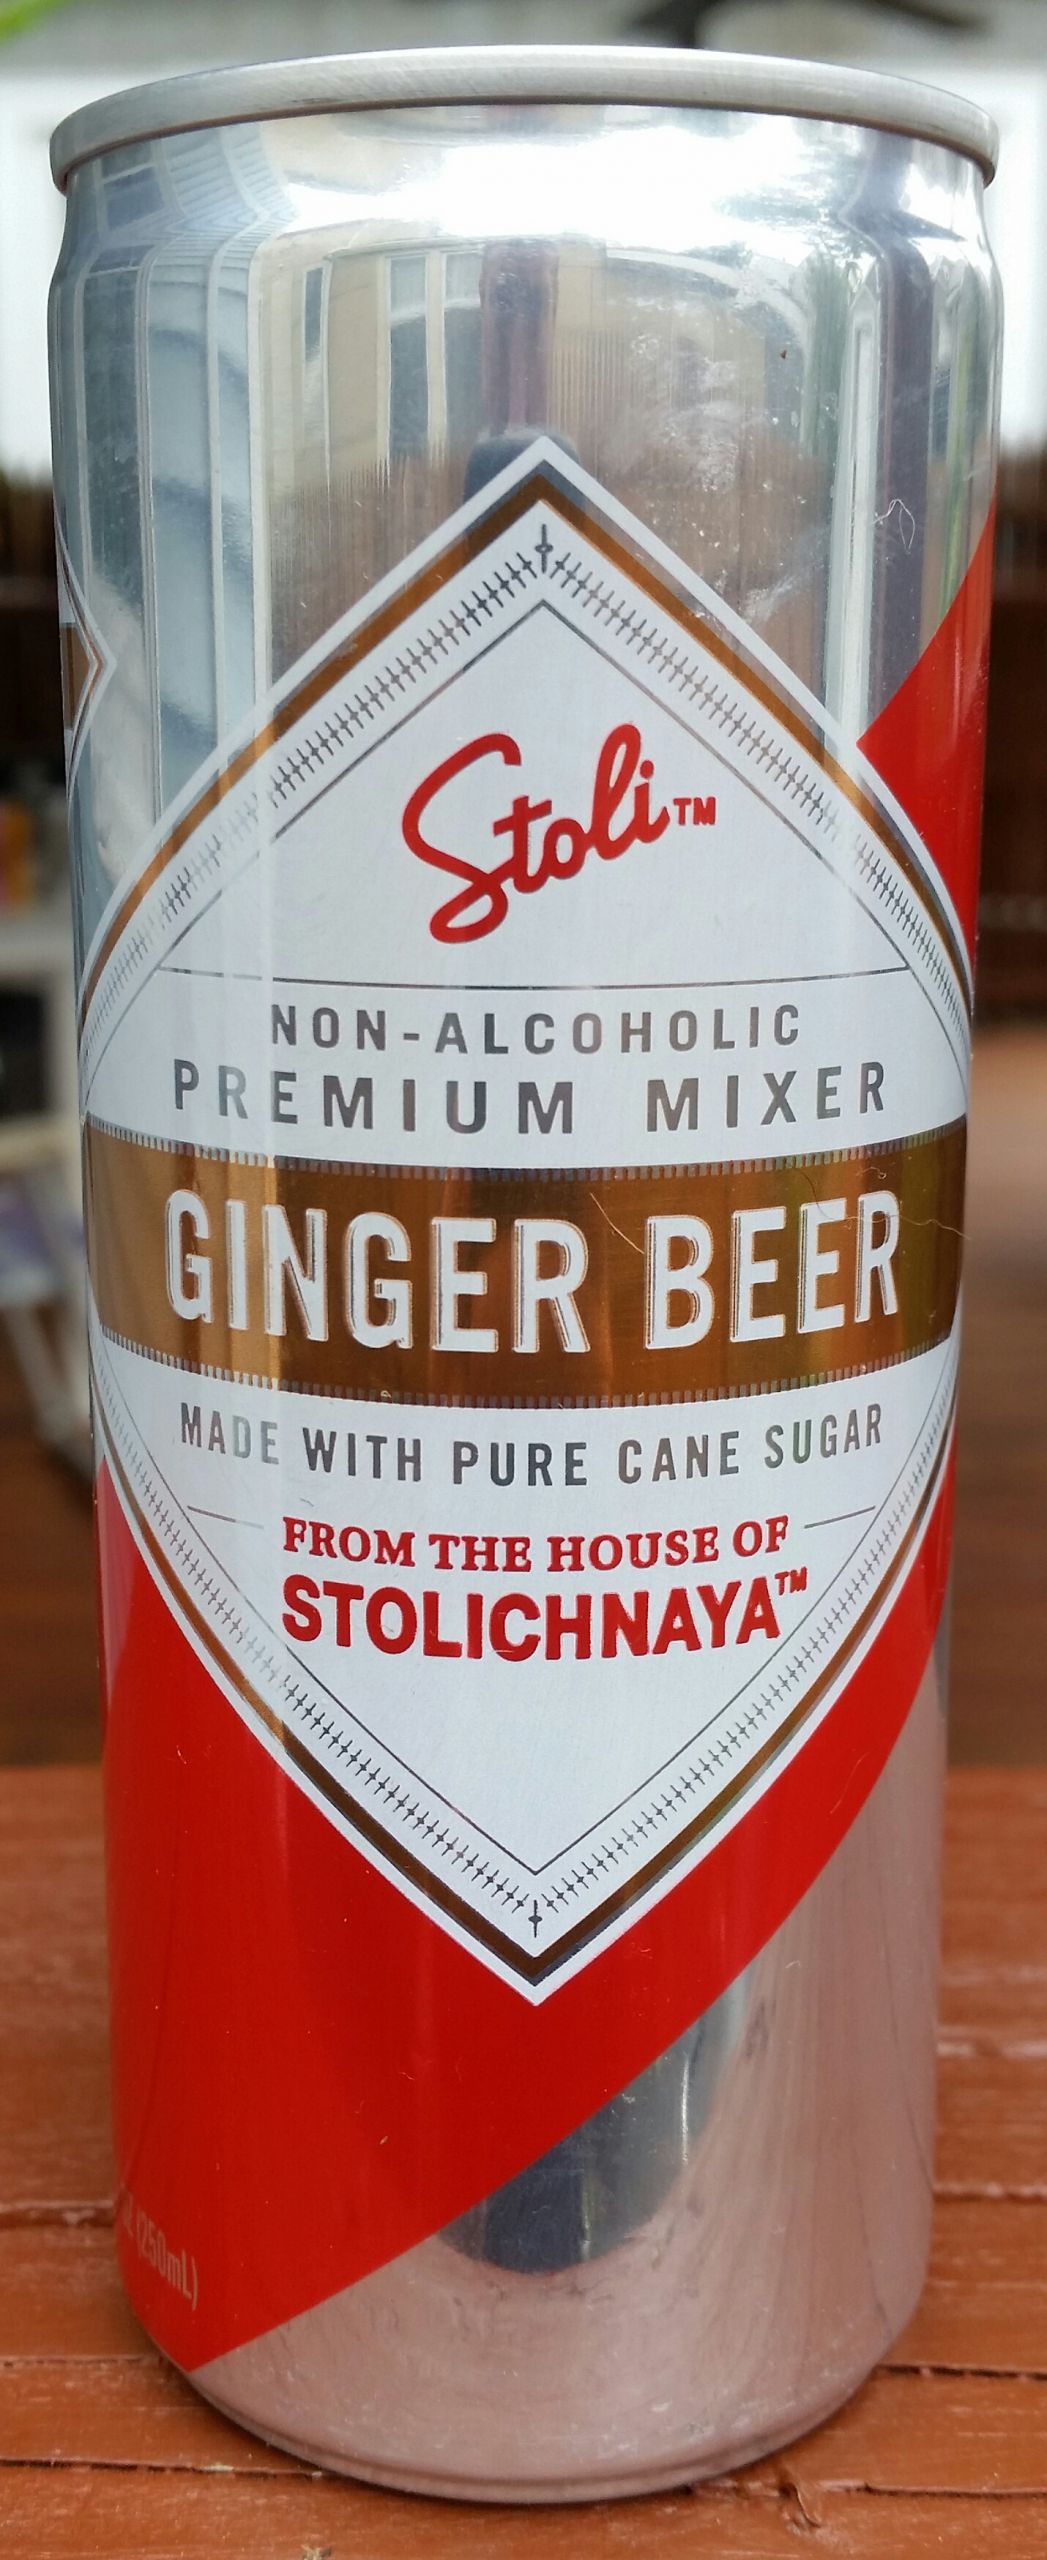 Non Alcoholic Ginger Beer Cocktails
 Thirsty Dudes Stoli Non Alcoholic Premium Mixer Ginger Beer